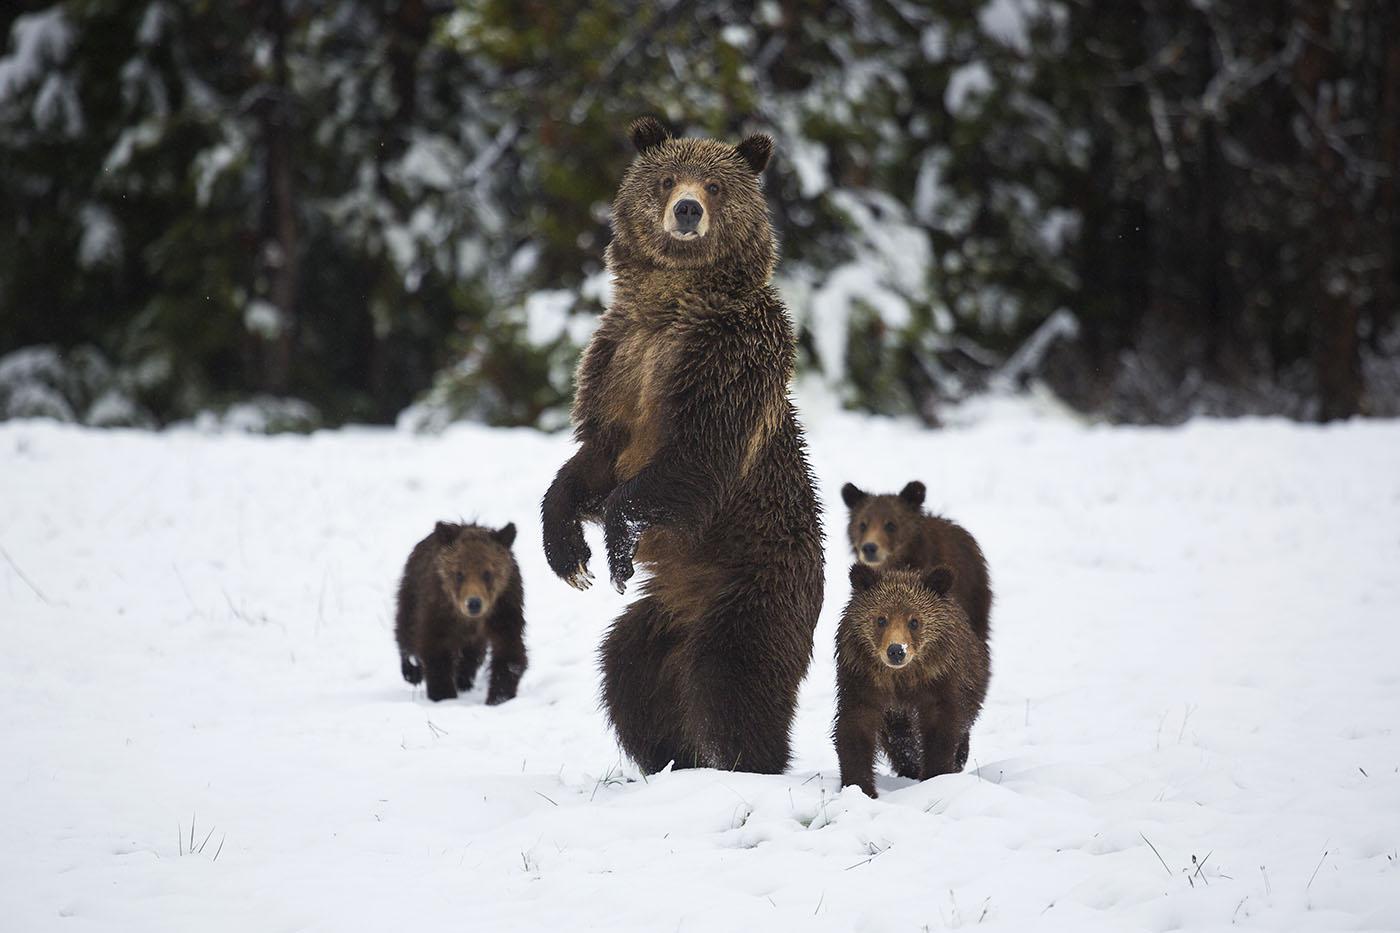 A grizzly bear and her cubs in Grand Teton National Park. Photo: Chase Dekker / Shutterstock.com